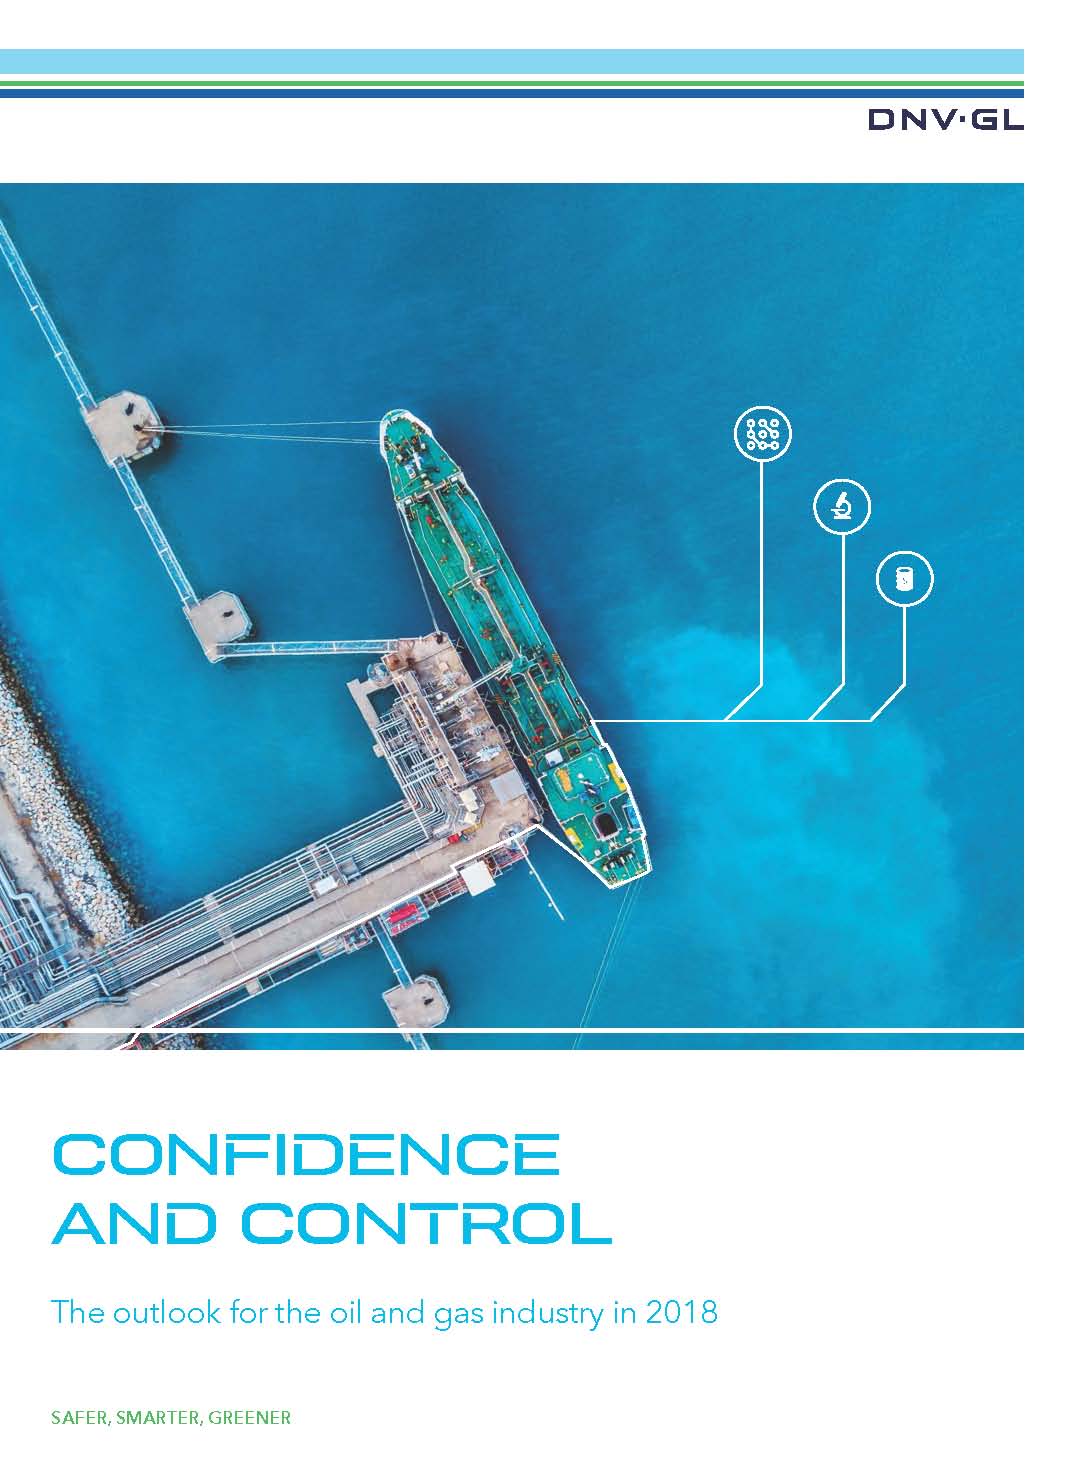 DNV GL industry outlook 2018 CONFIDENCE AND CONTROL